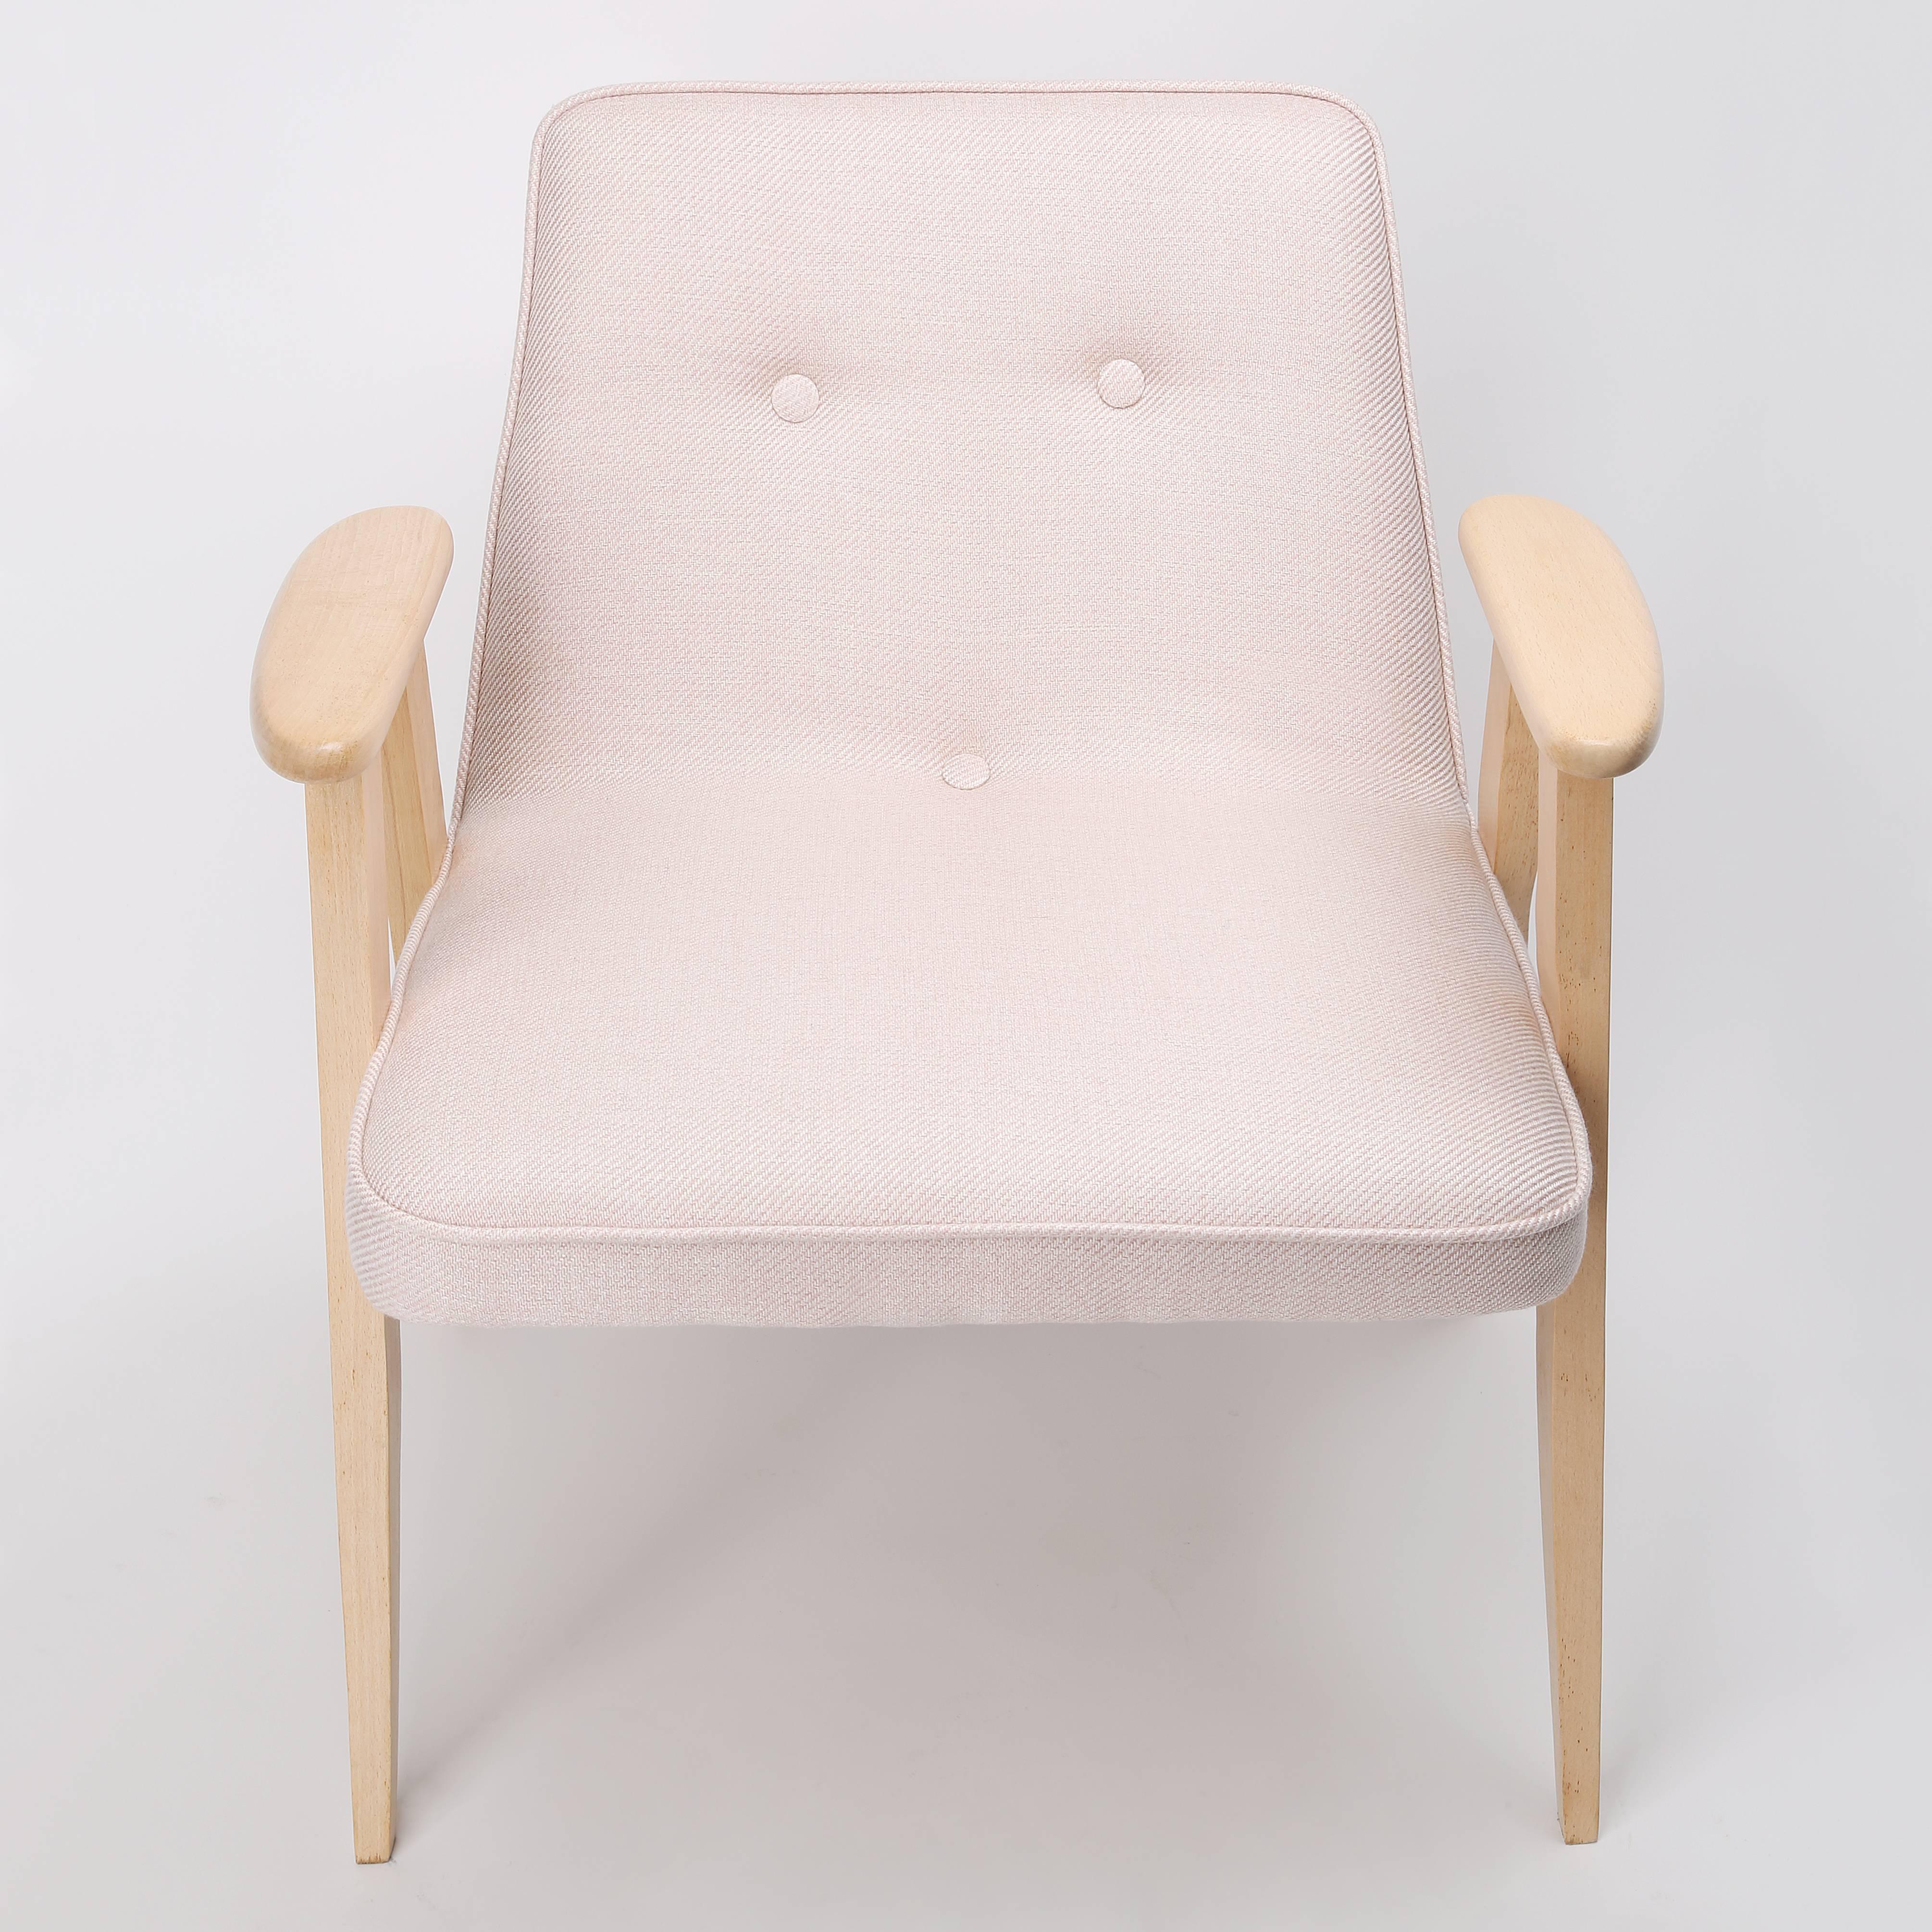 The 366 armchair is an icon of the Polish design of the PRL period.

The famous armchair was designed in 1962 by the Polish interior designer and furniture designer Jozef Marian Chierowski. Produced in the Lower Silesian Furniture Factory in